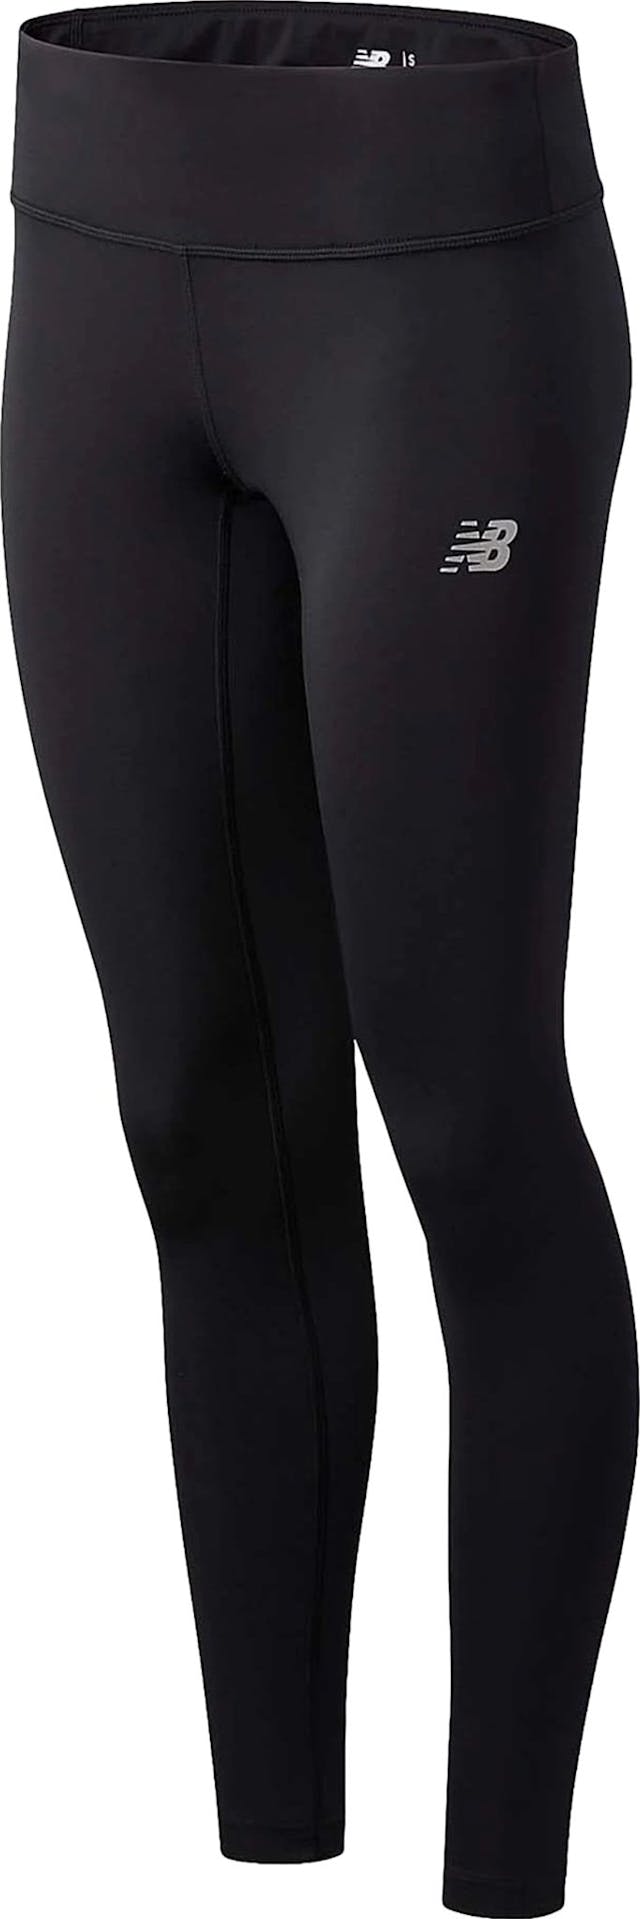 Product image for Accelerate Tights - Women's